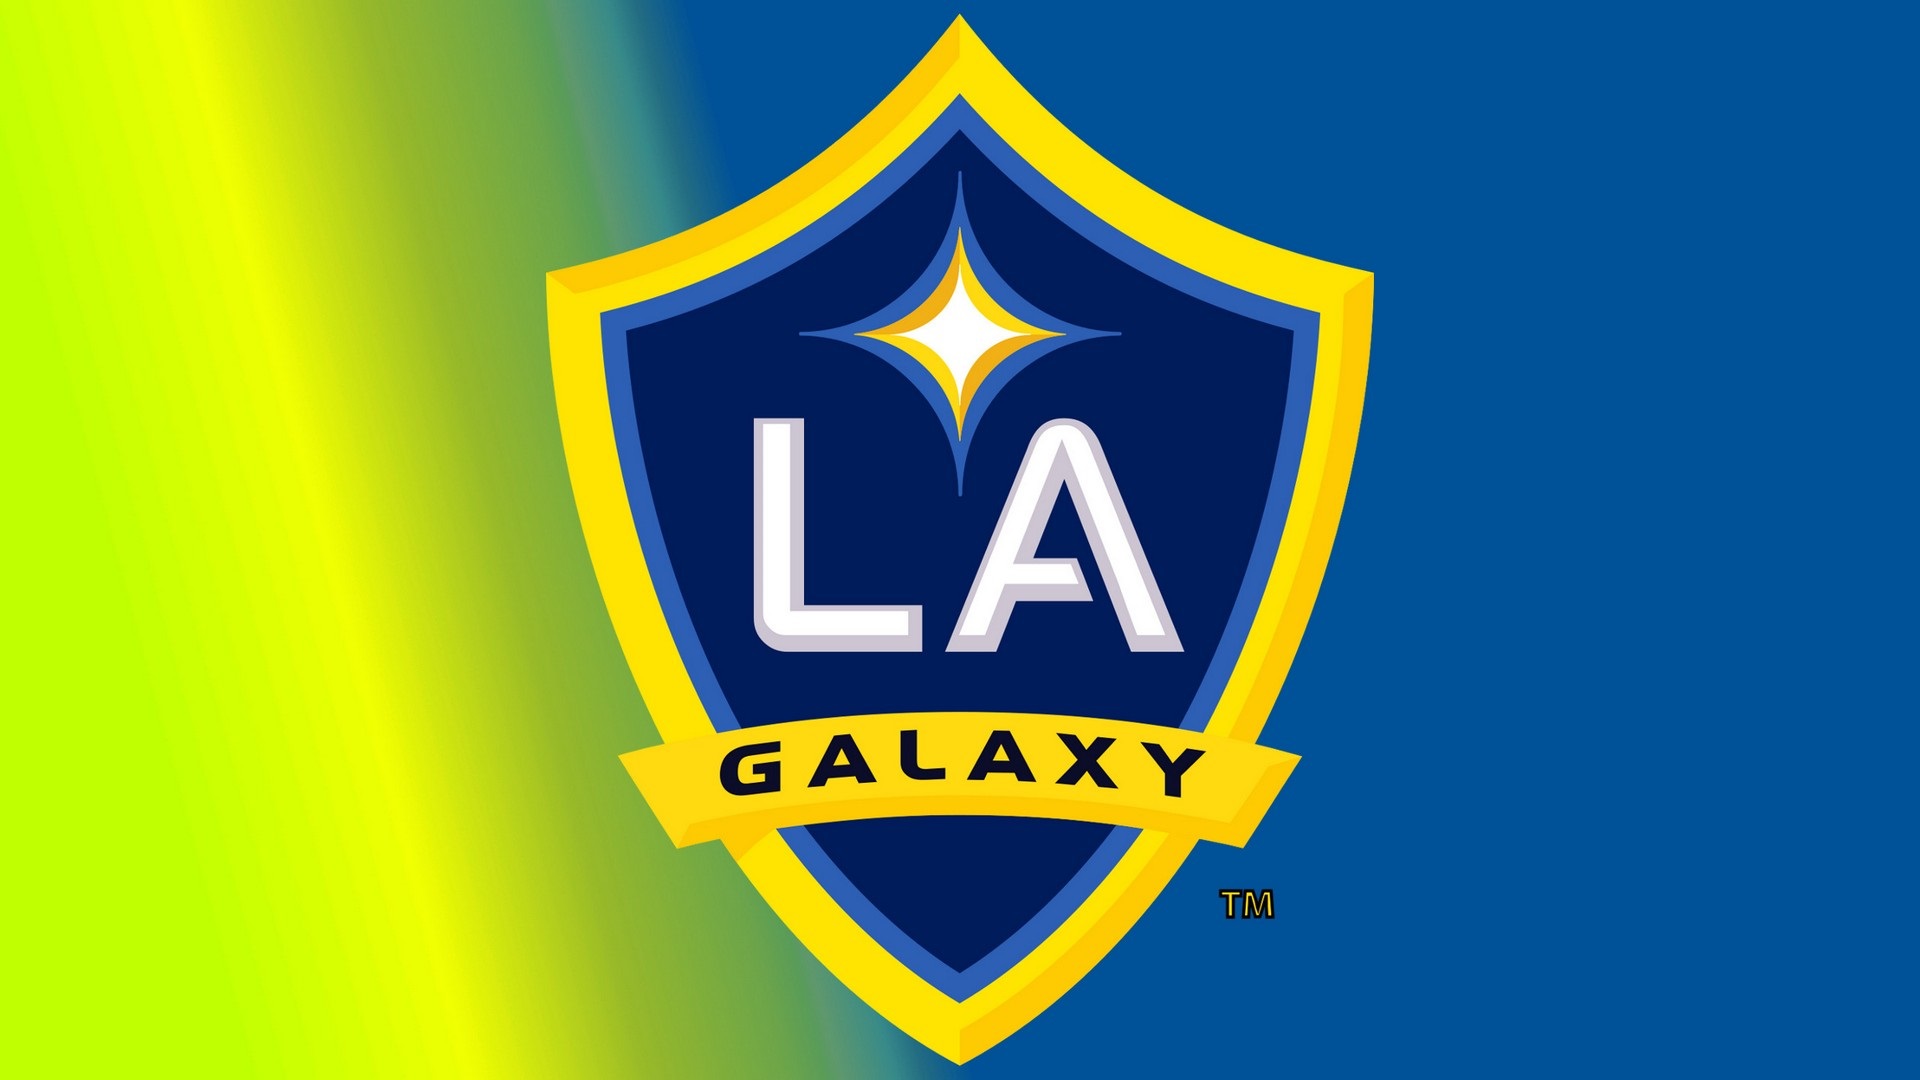 HD Backgrounds LA Galaxy with high-resolution 1920x1080 pixel. You can use this wallpaper for your Desktop Computers, Mac Screensavers, Windows Backgrounds, iPhone Wallpapers, Tablet or Android Lock screen and another Mobile device